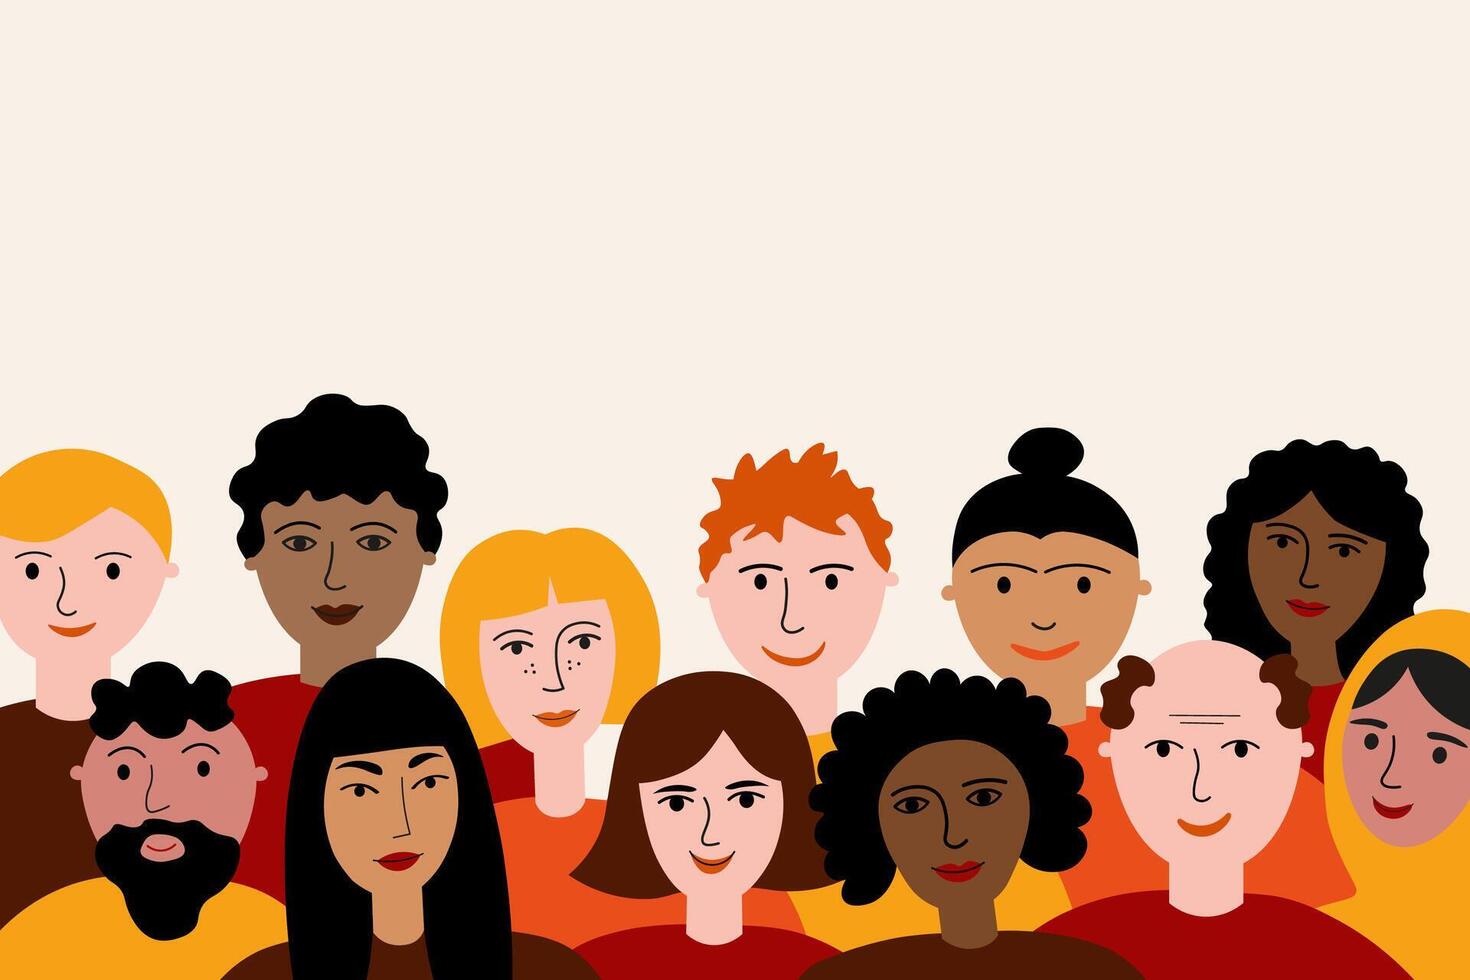 Multicultural different race people background for text hand drawn flat vector illustration other nationalities and cultures characters, skin. Social network friendship community, we are all different